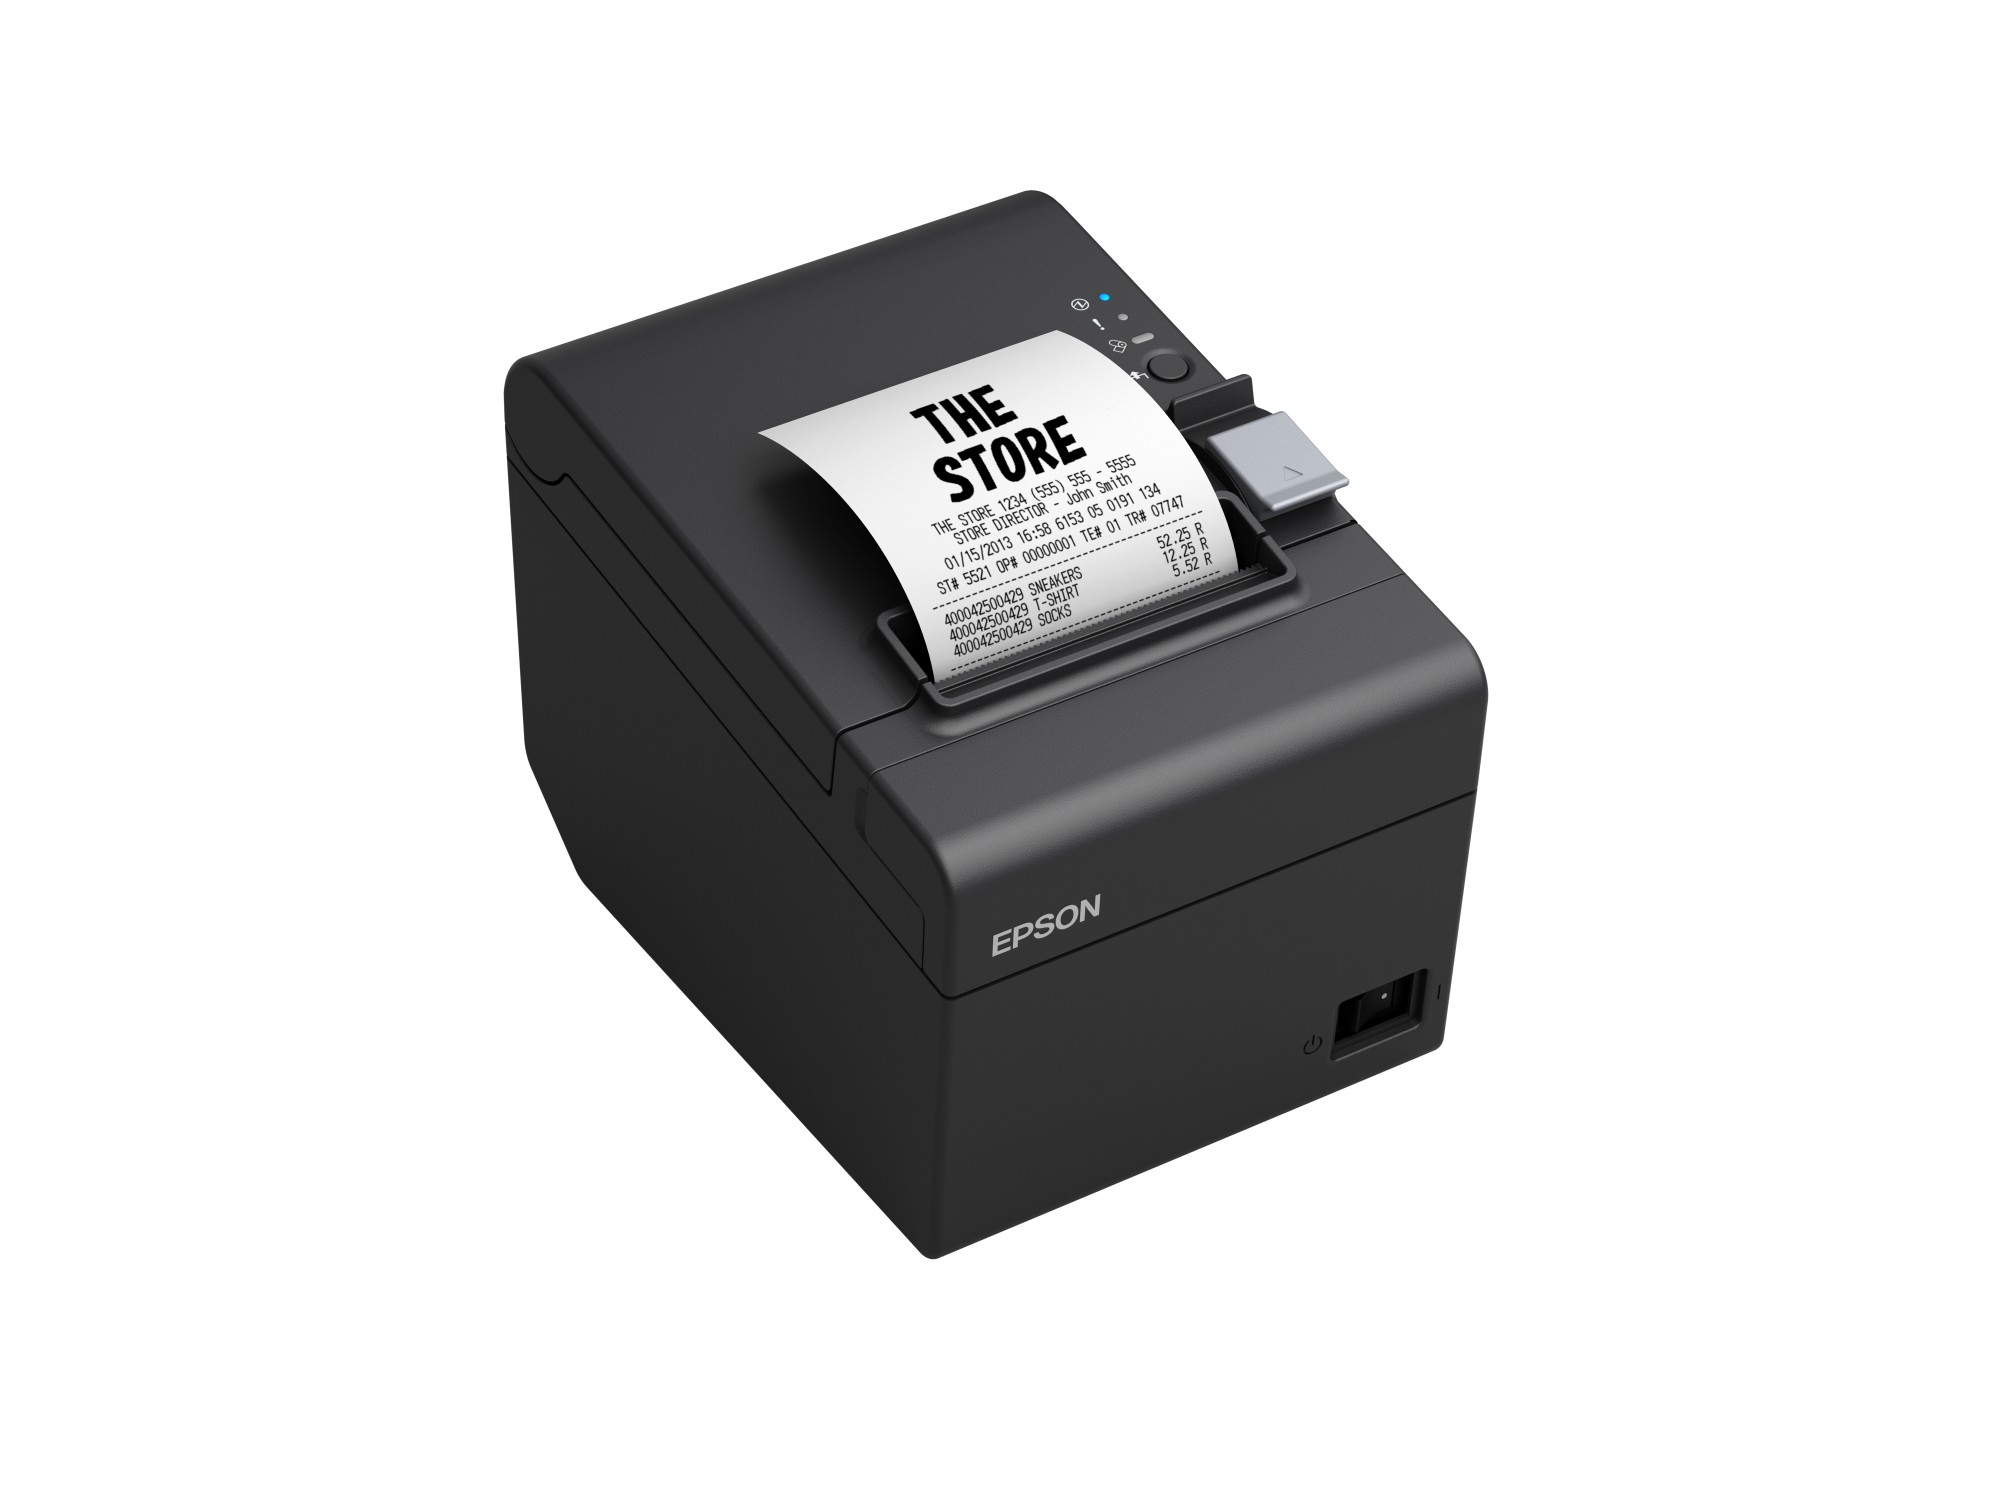 Epson Tm T20iii 203 X 203 Dpi Wired Thermal Pos Printer 1217 In Distributorwholesale Stock For 8434